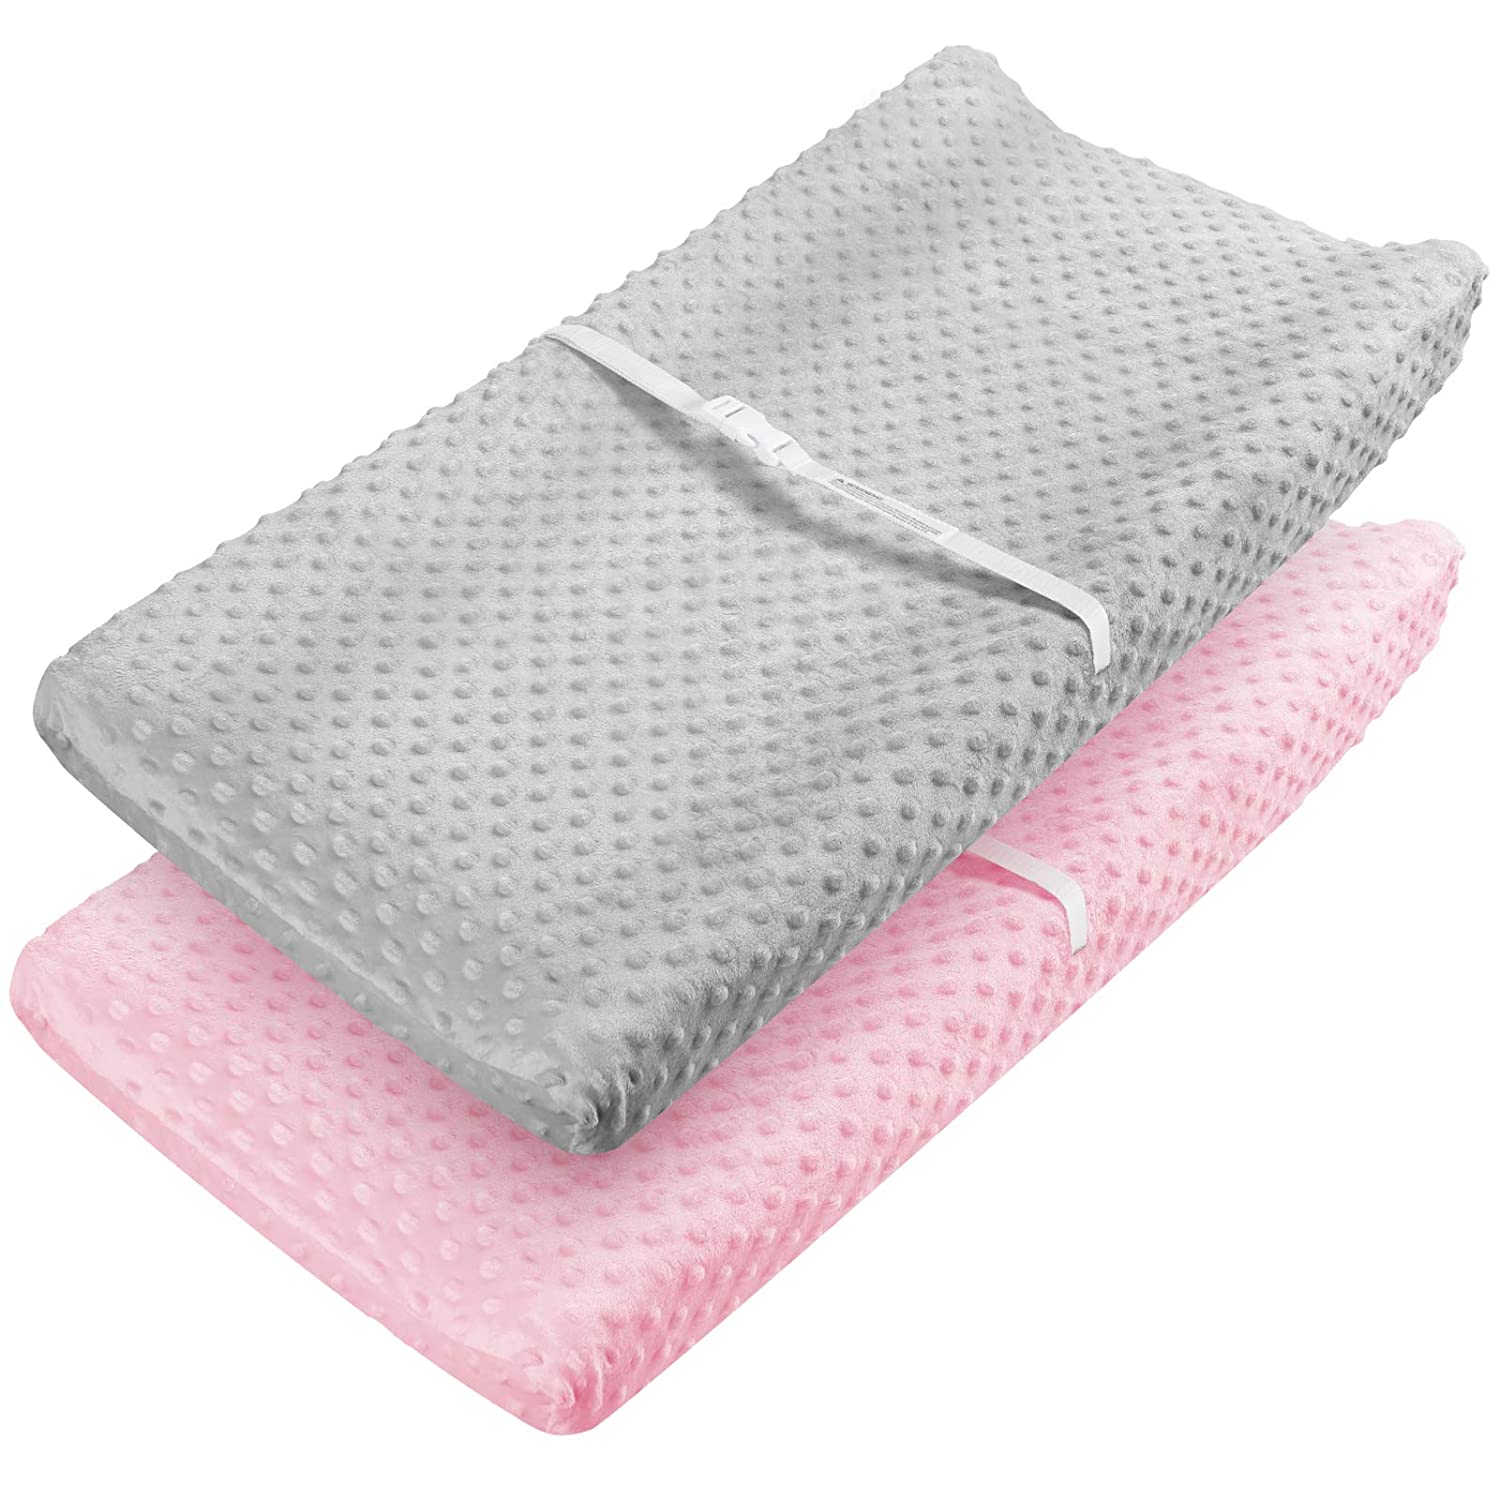 Babebay Changing Pad Covers for Baby Girls - Light Grey & Pink